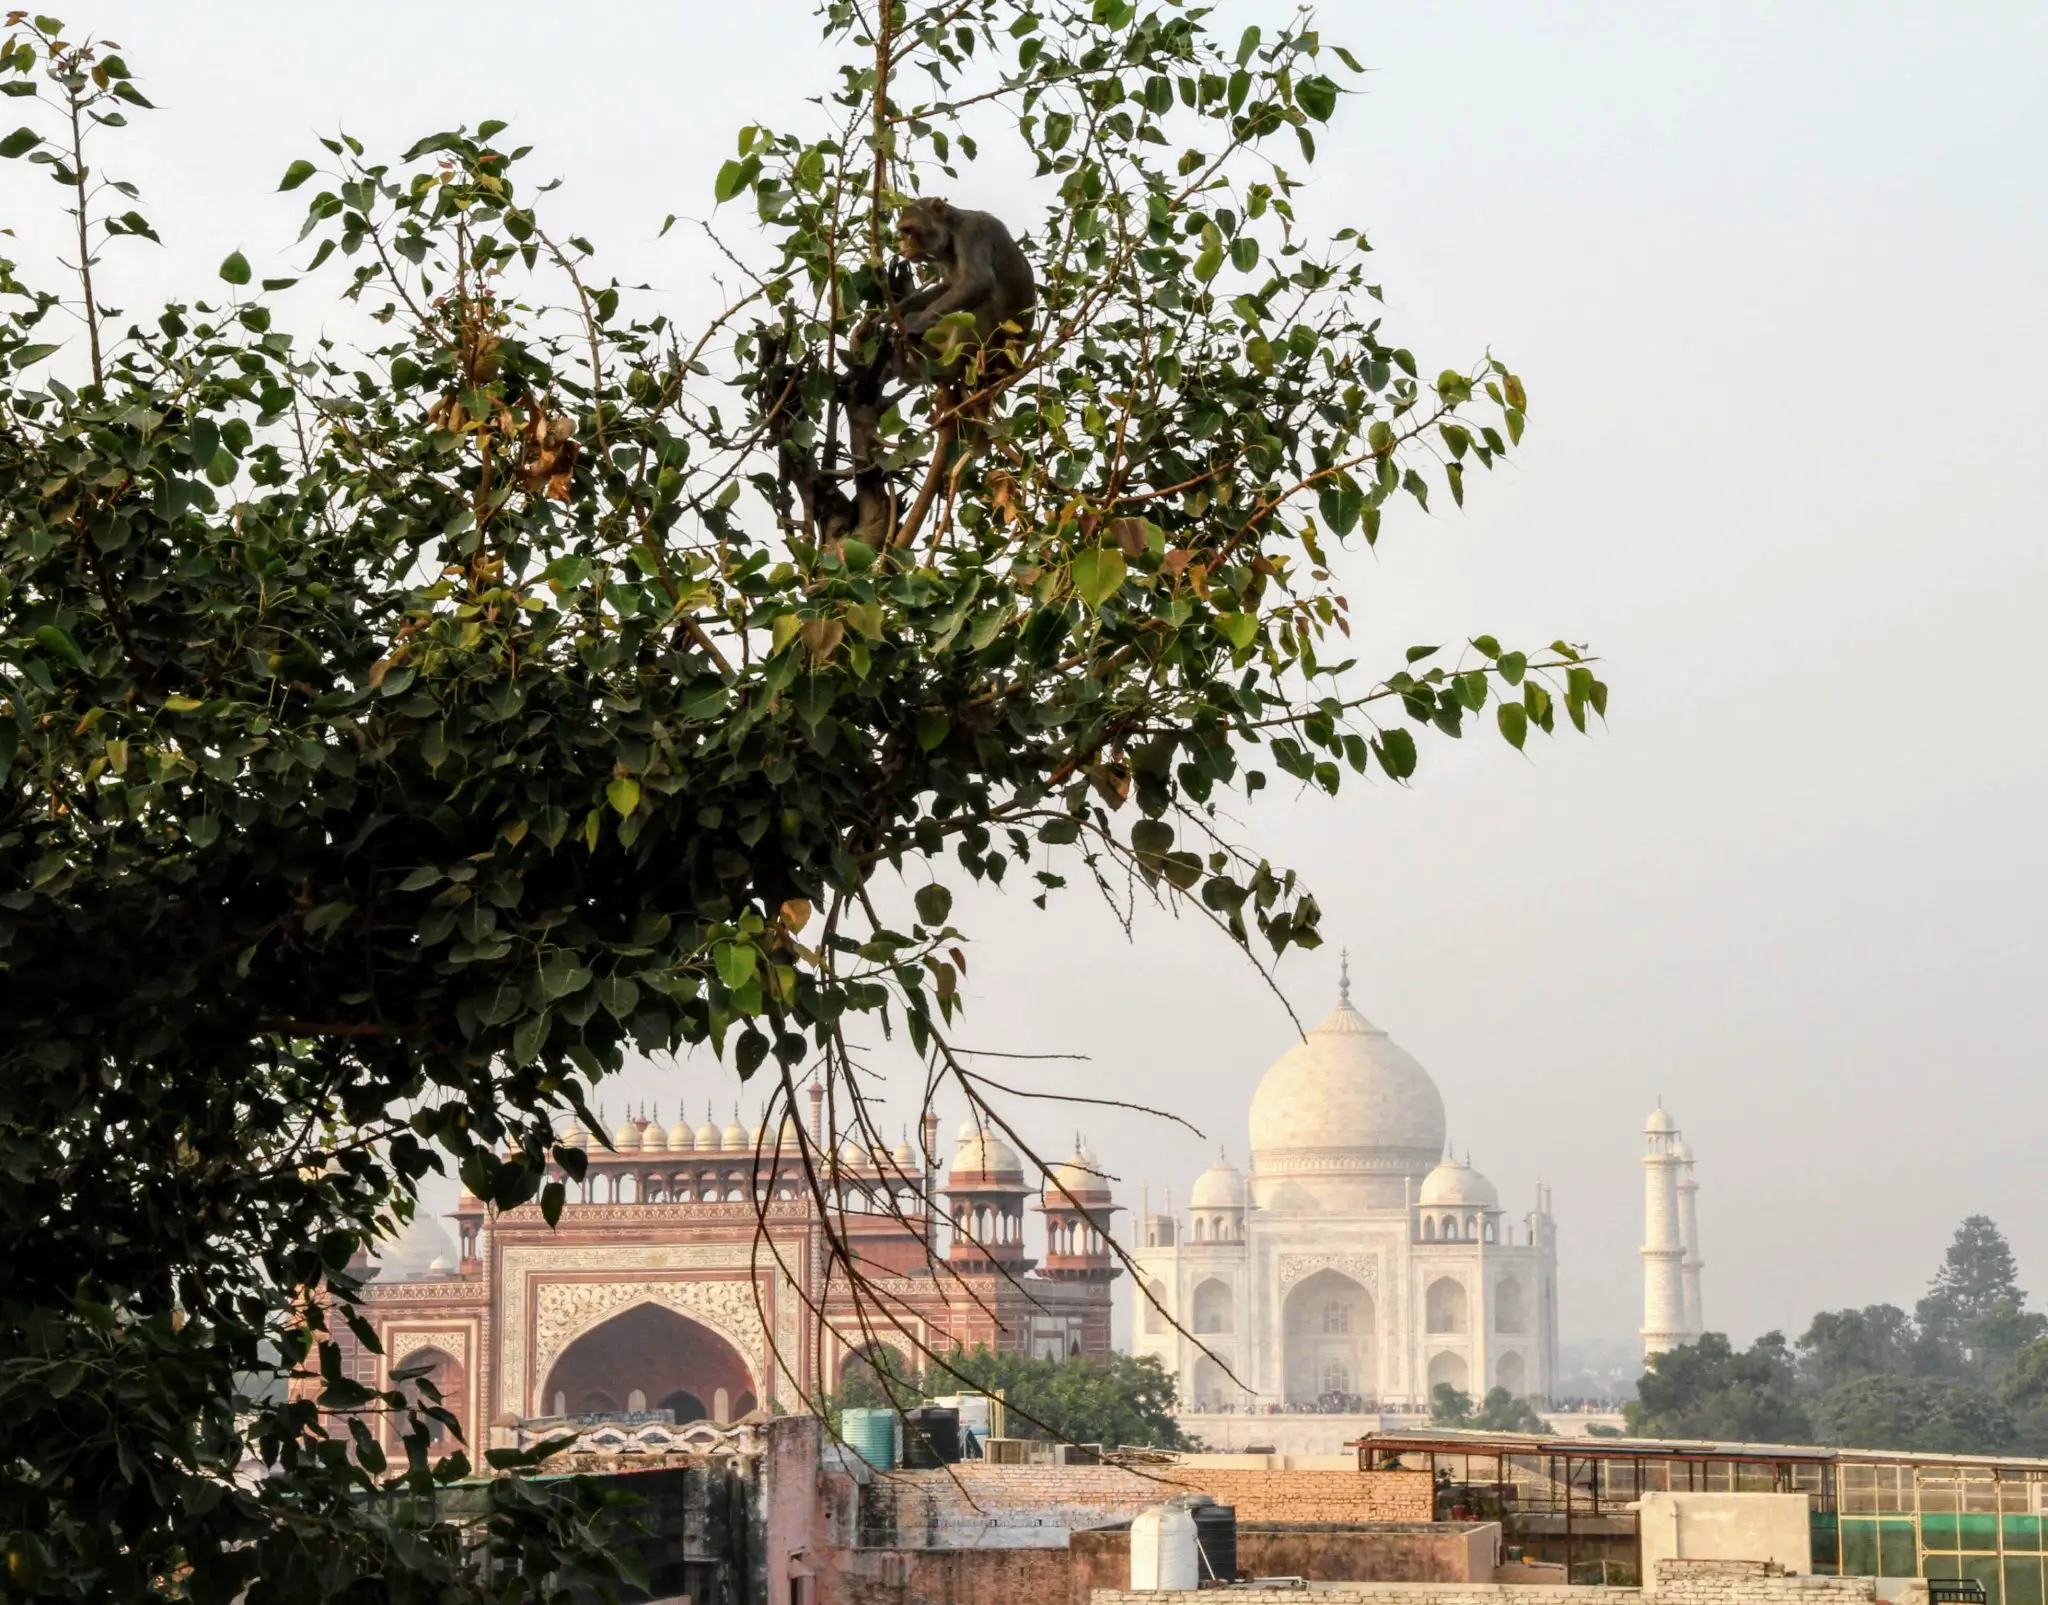 Macaques in front of the Taj Mahal